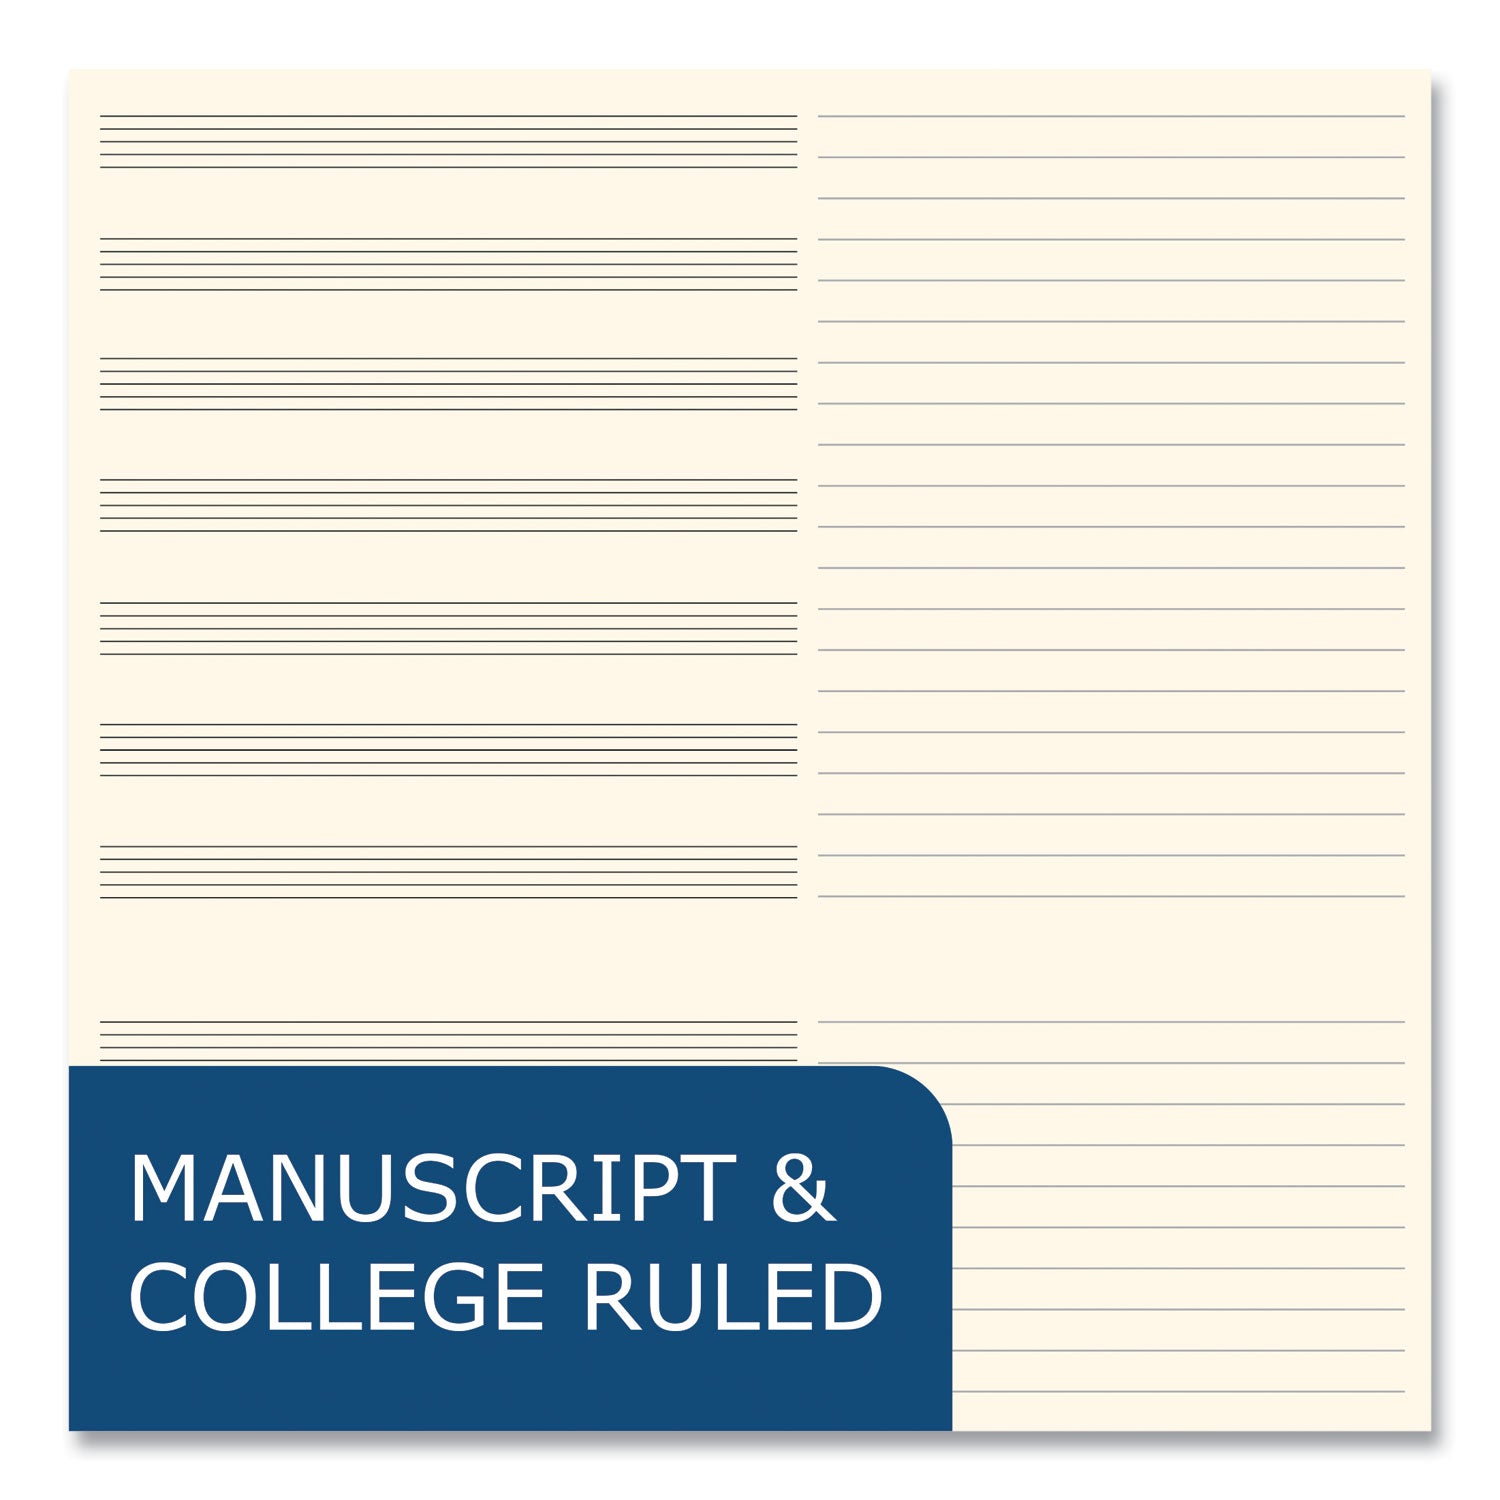 music-notebook-medium-college-rule-transcription-format-blue-cover-32-85-x-11-sheets-24-ct-ships-in-4-6-bus-days_roa11032cs - 5